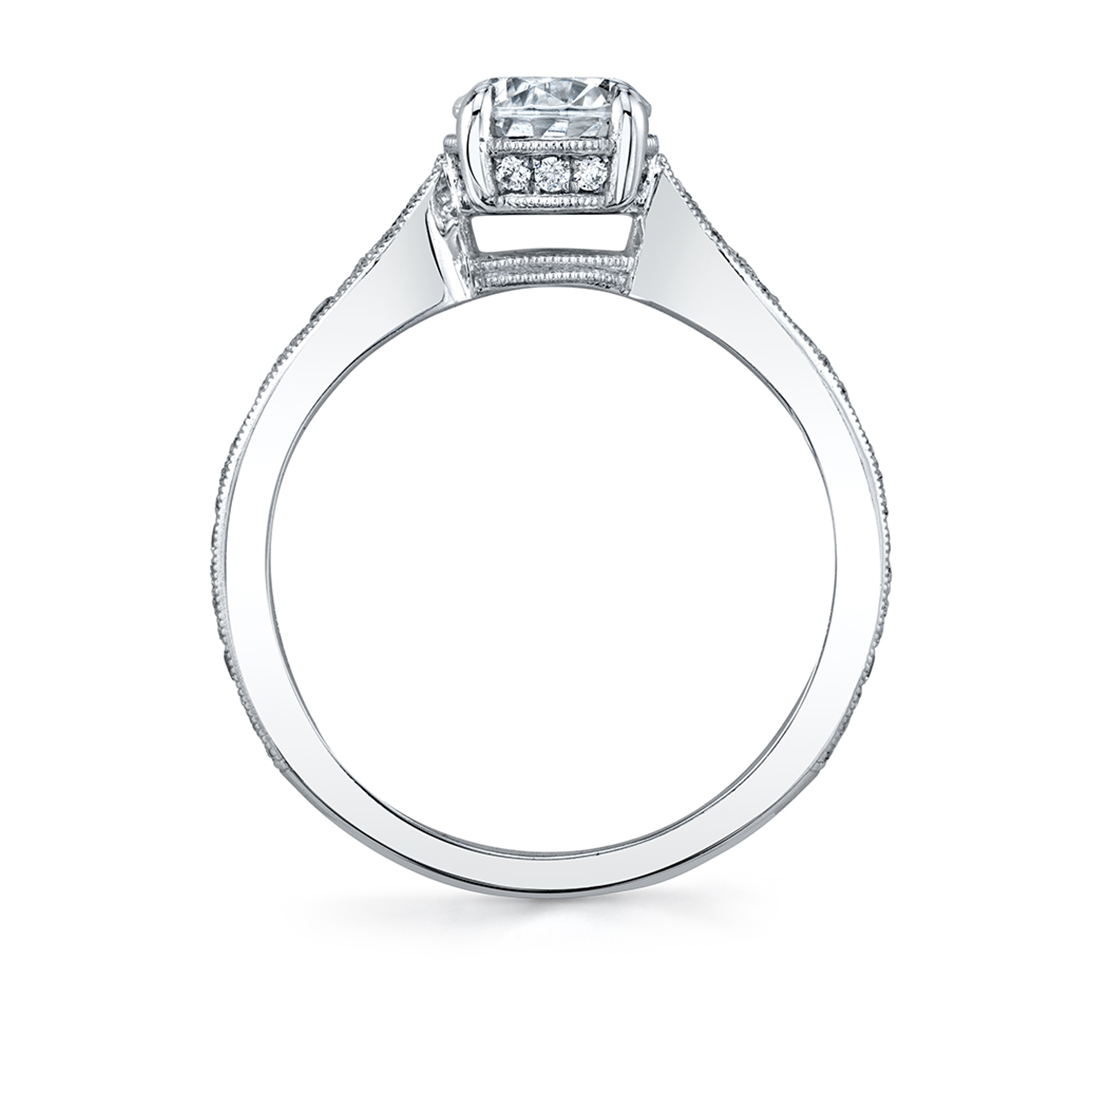 Side Profile of a Flower Engagement Ring - Olive